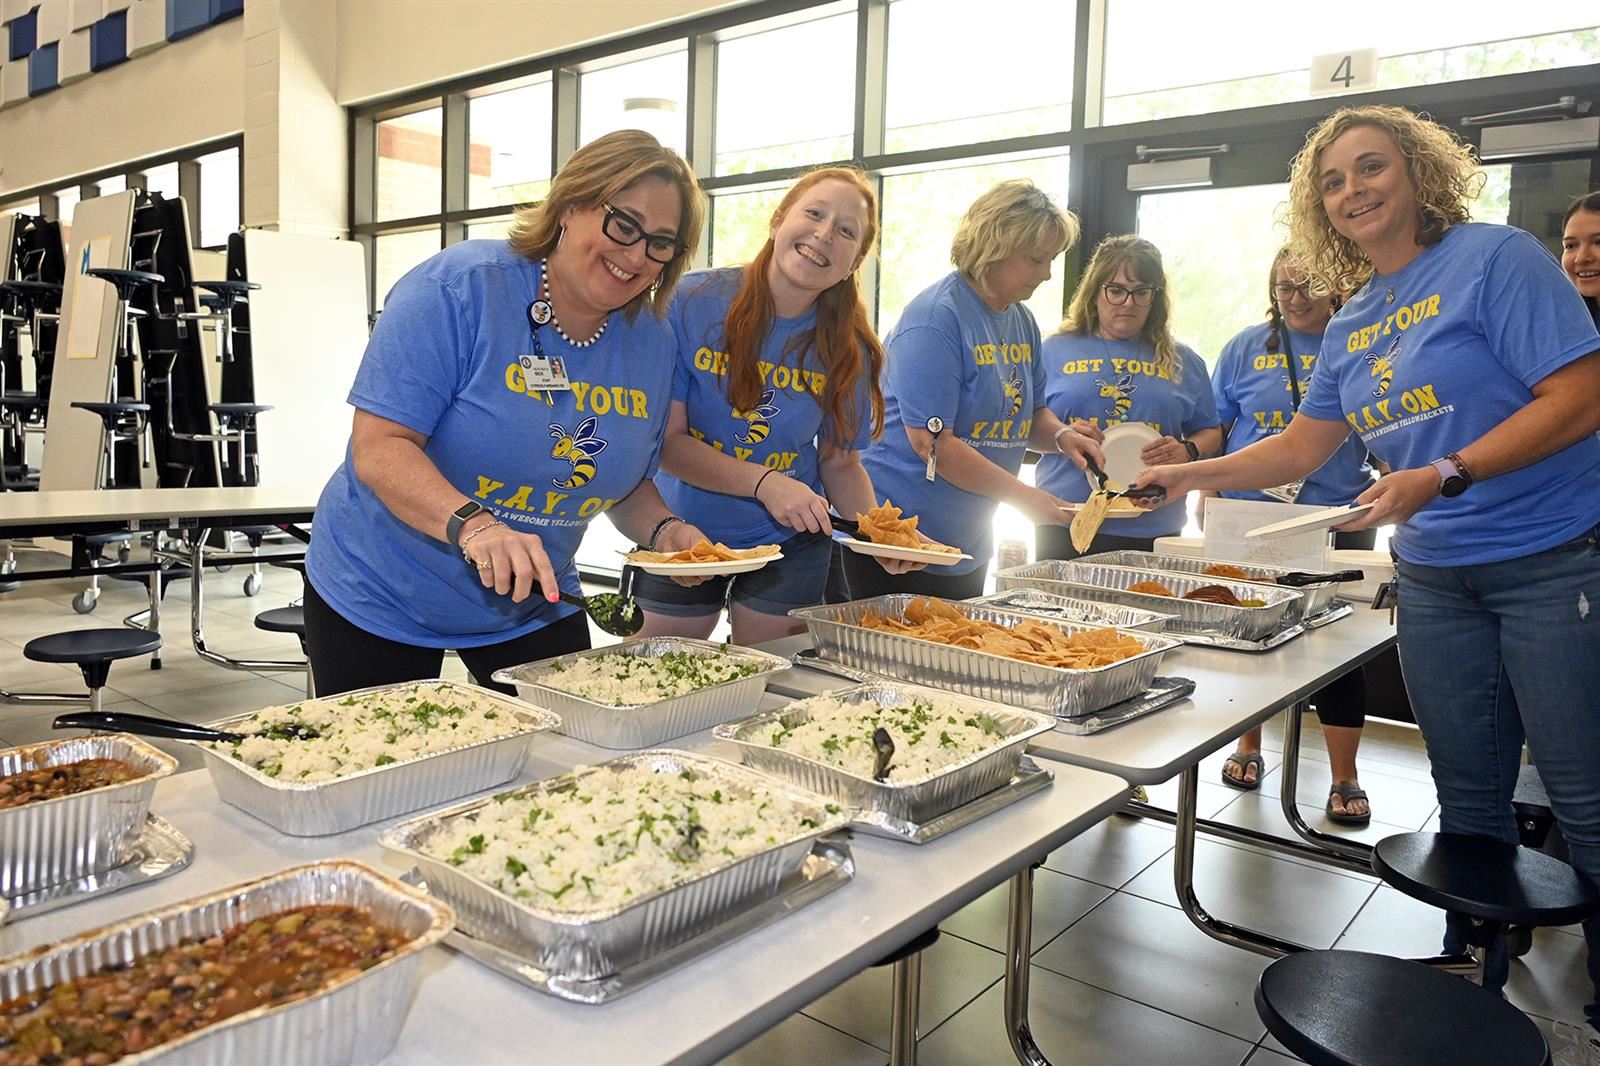 Yeager Elementary School staff serve themselves from a catered lunch provided to them from Cabo Bob’s Burritos.